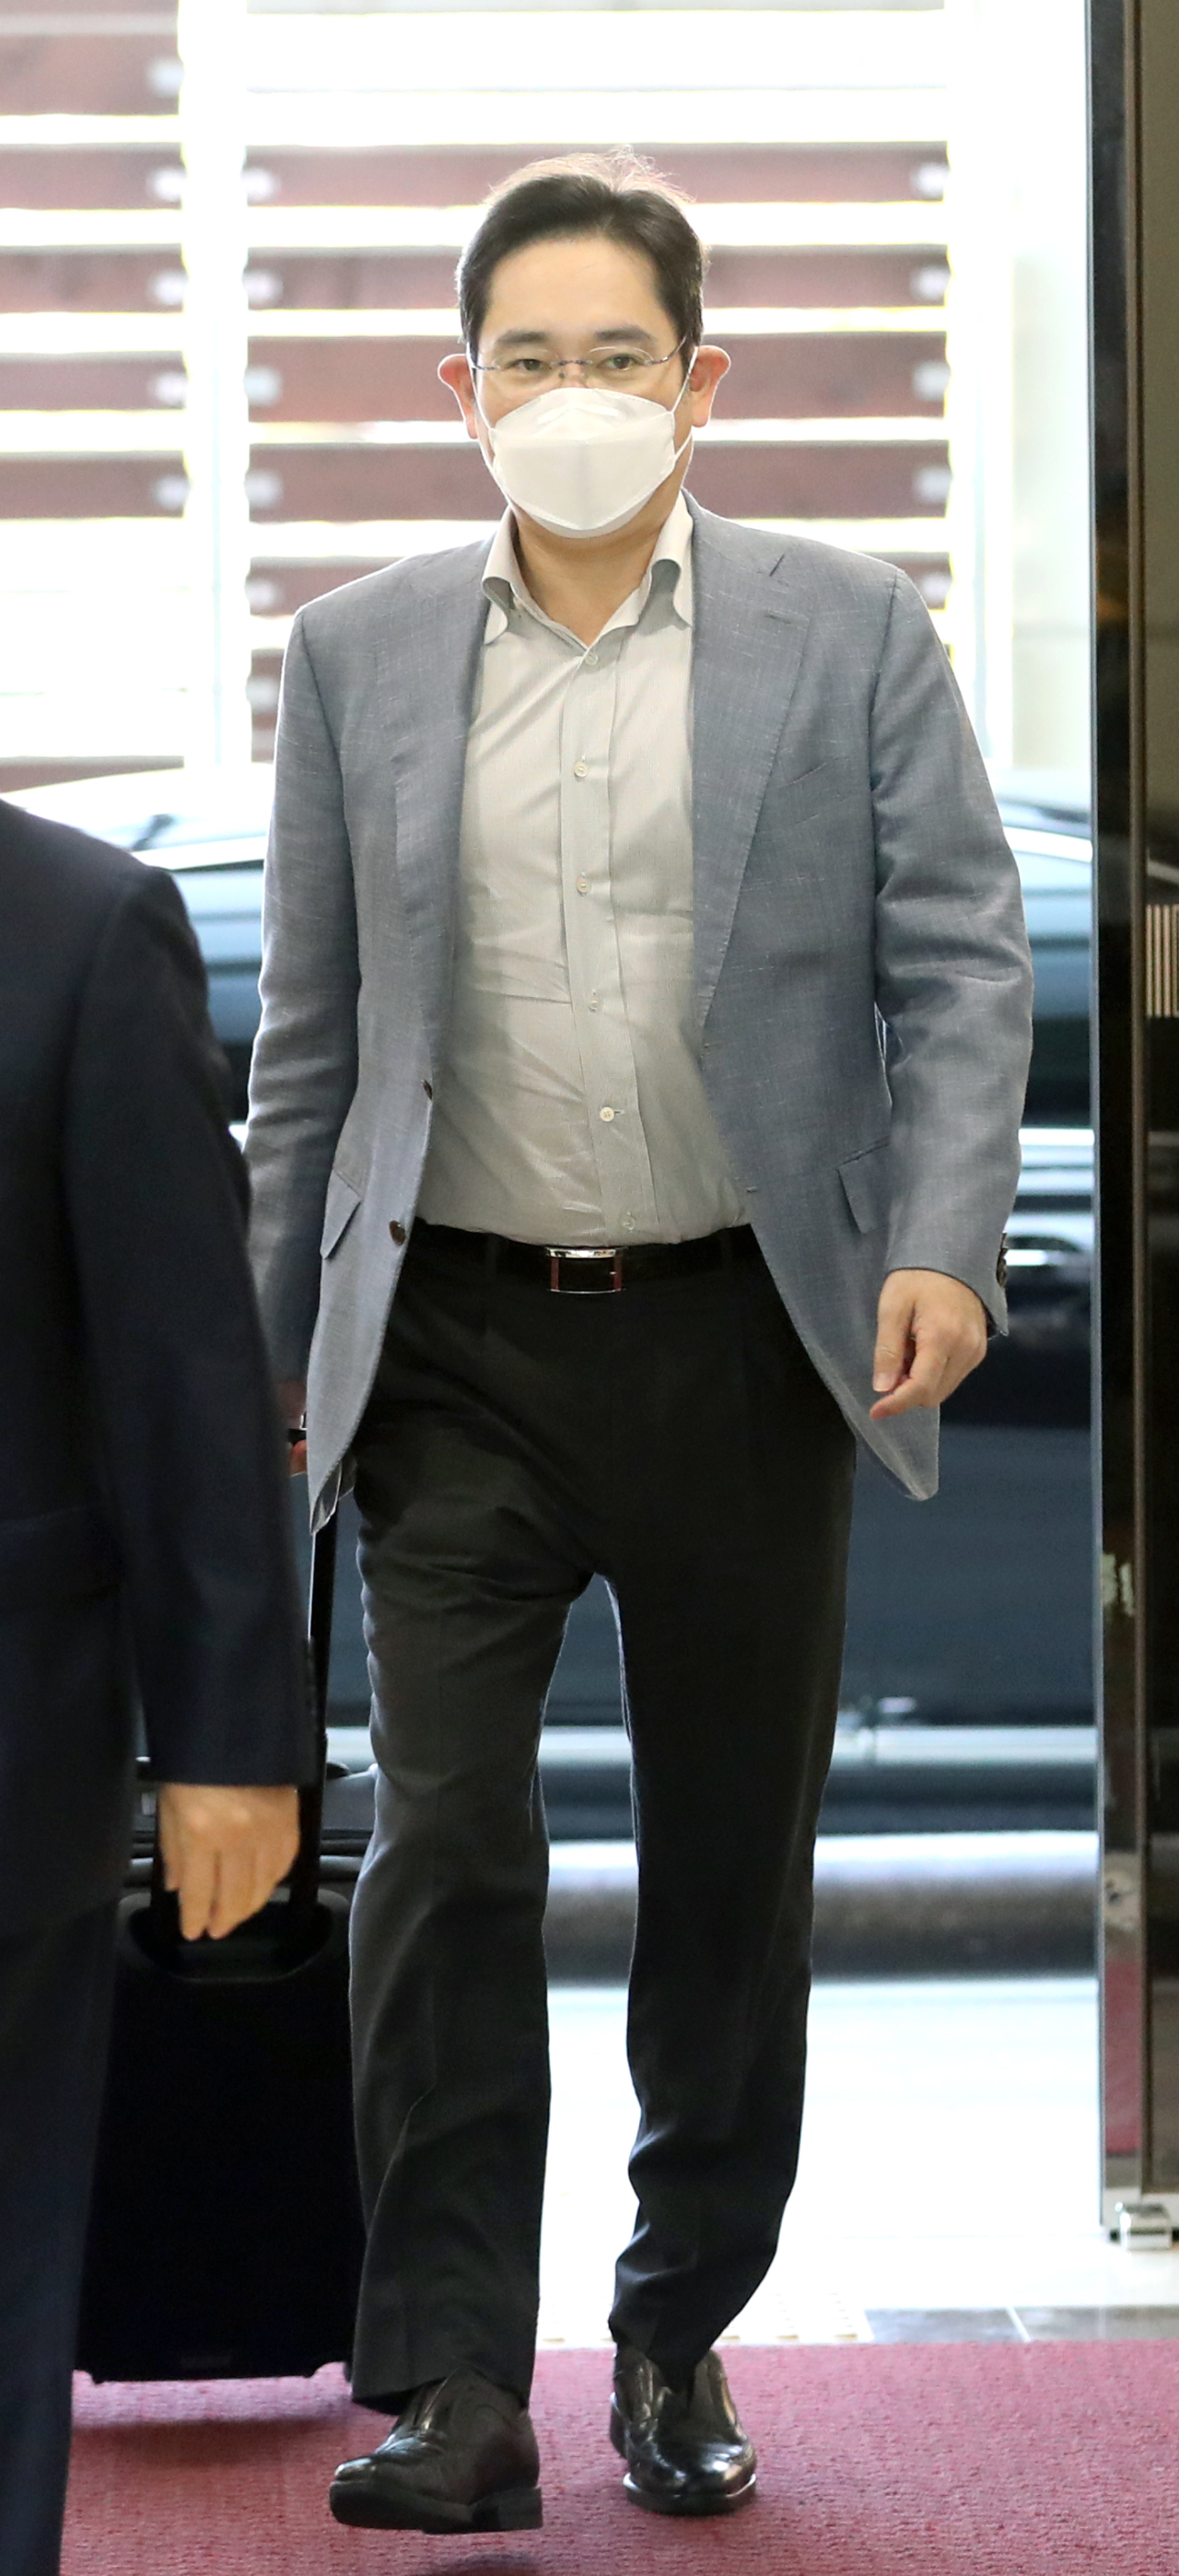 Samsung Electronics Vice Chairman Lee Jae-yong arrives at Gimpo International Airport in Seoul on Monday following his business trip to Europe on Wednesday. (Yonhap)